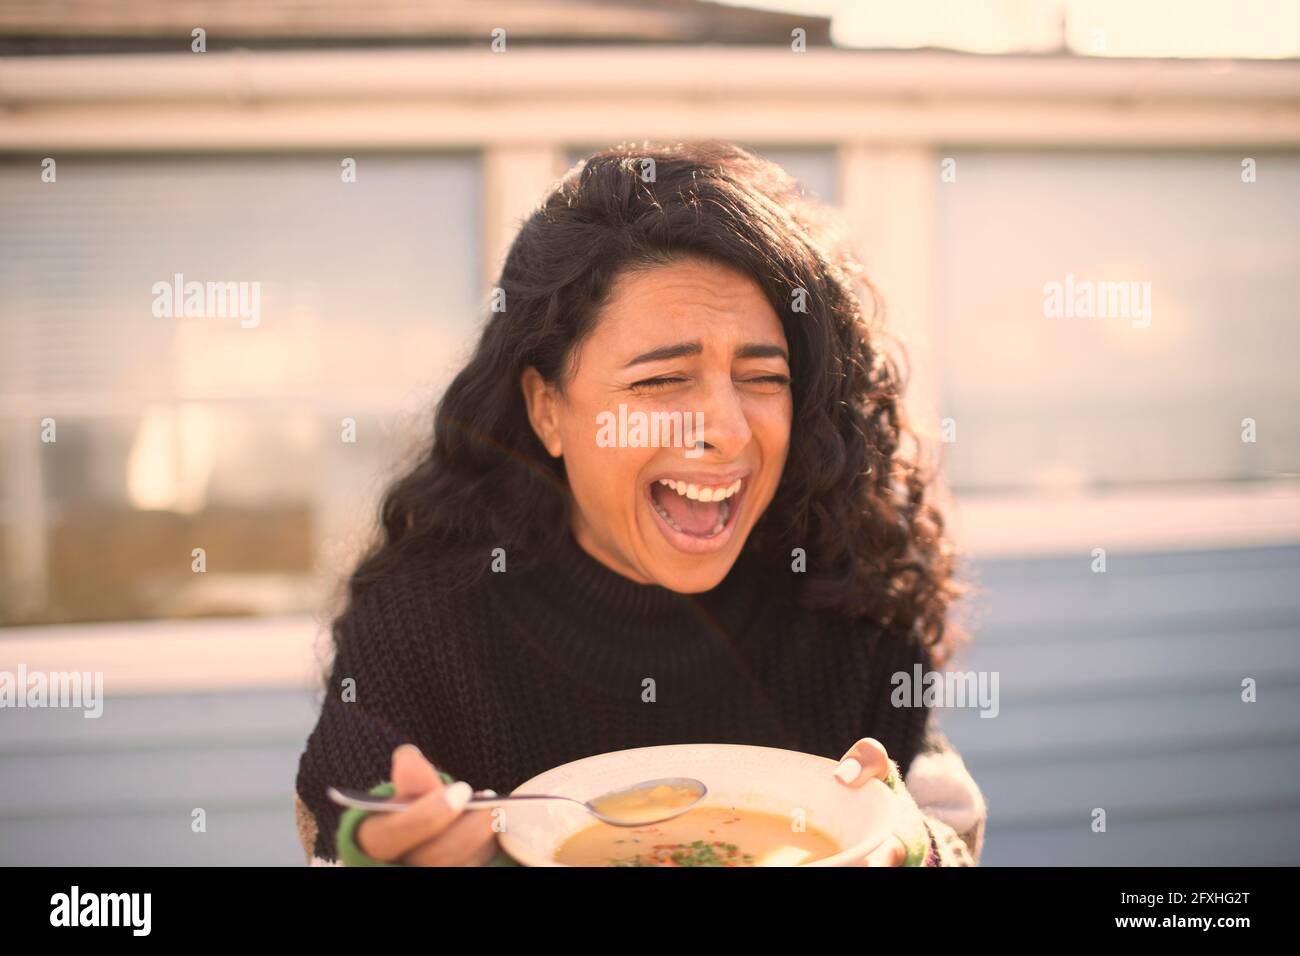 Happy laughing woman eating chowder on sunny patio Stock Photo